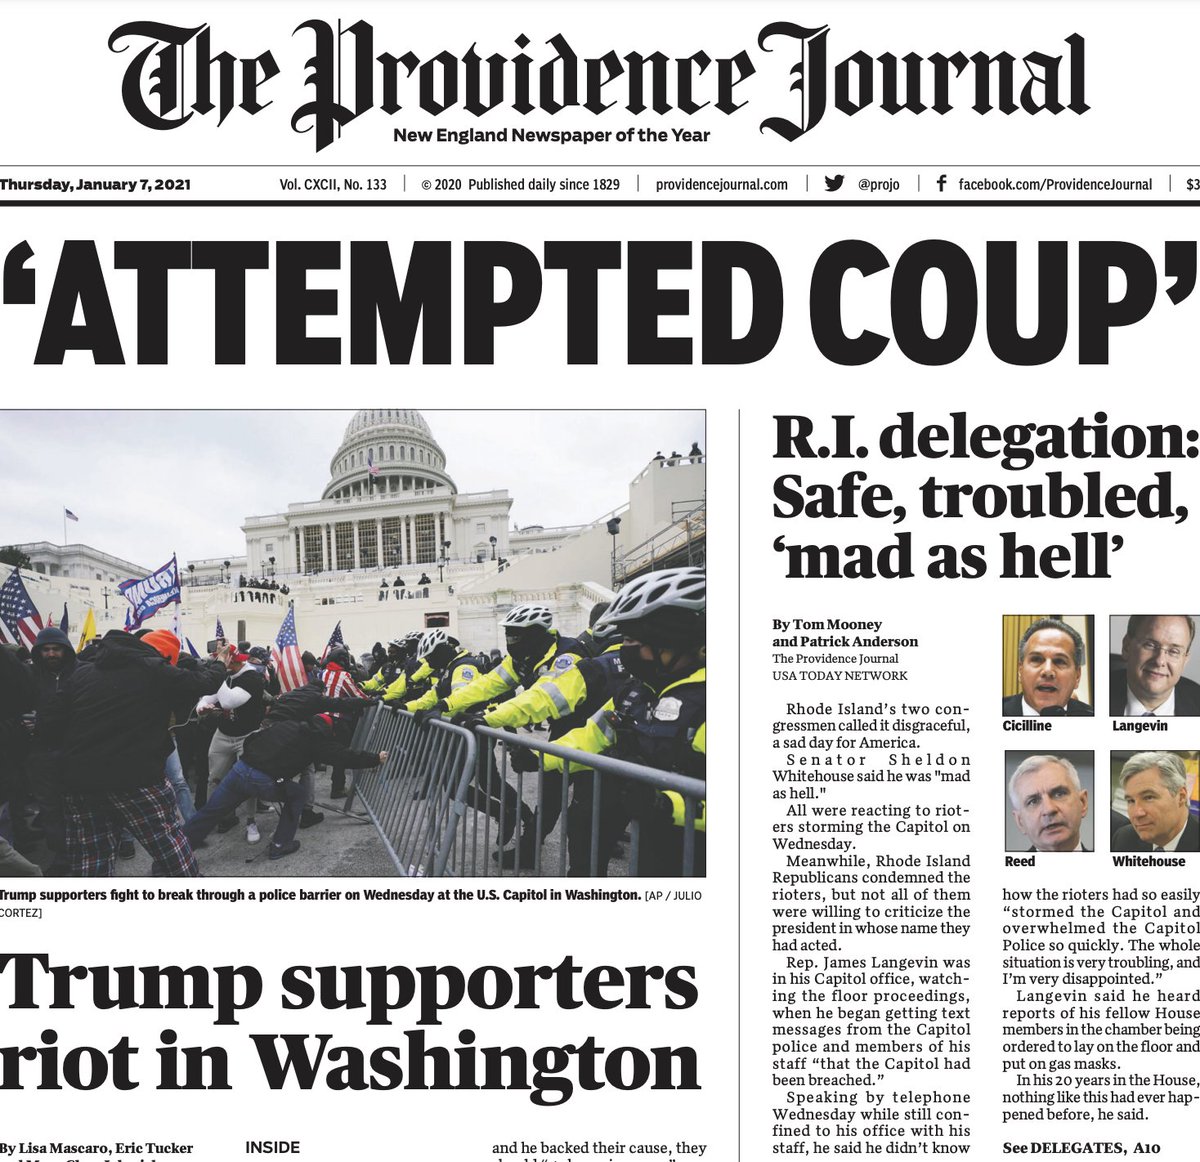 Roundup of front pages from around the country (thread)